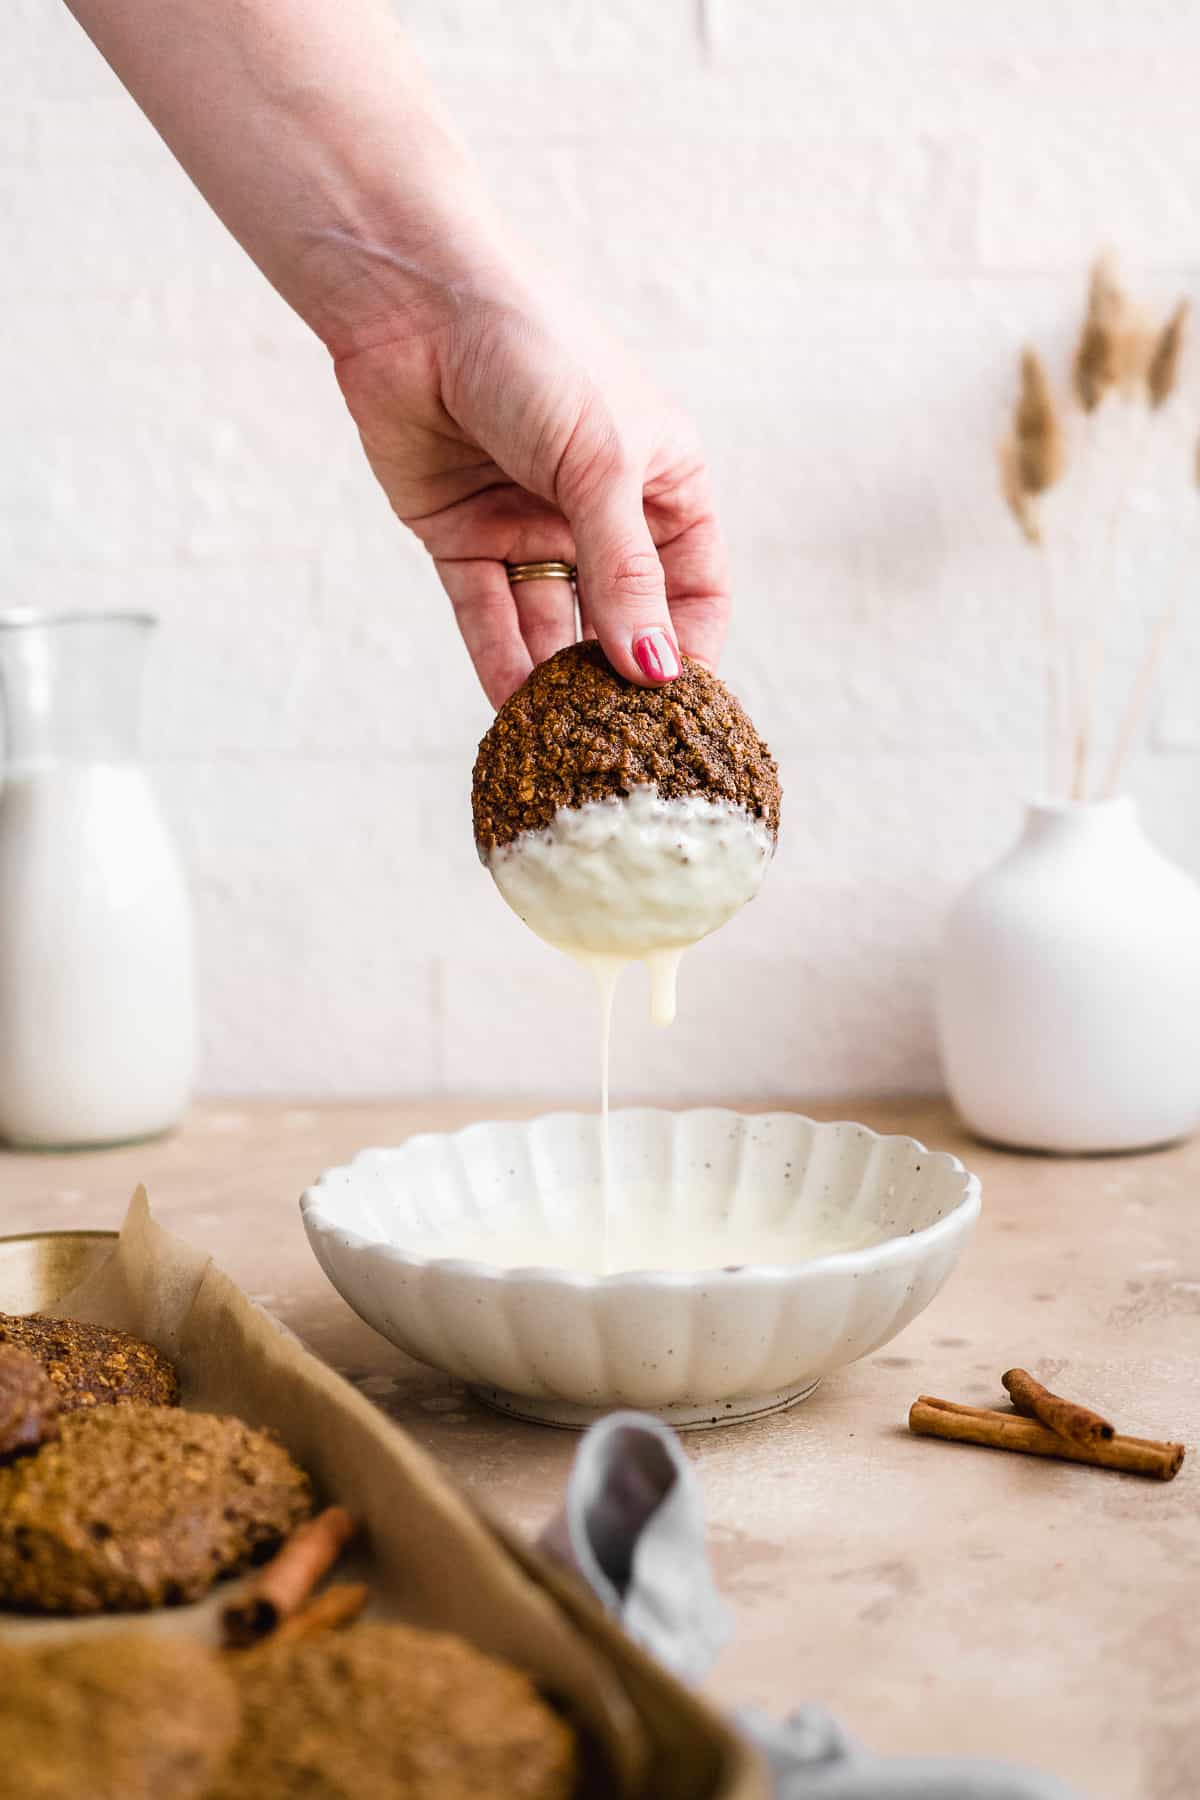 White scalloped bowl with decadent white chocolate.  View of hand holding a yummy oatmeal gingerbread cookie as it's dipped into the white chocolate and chocolate drips off the cookie.  Cinnamon sticks and additional cookies sit nearby.  